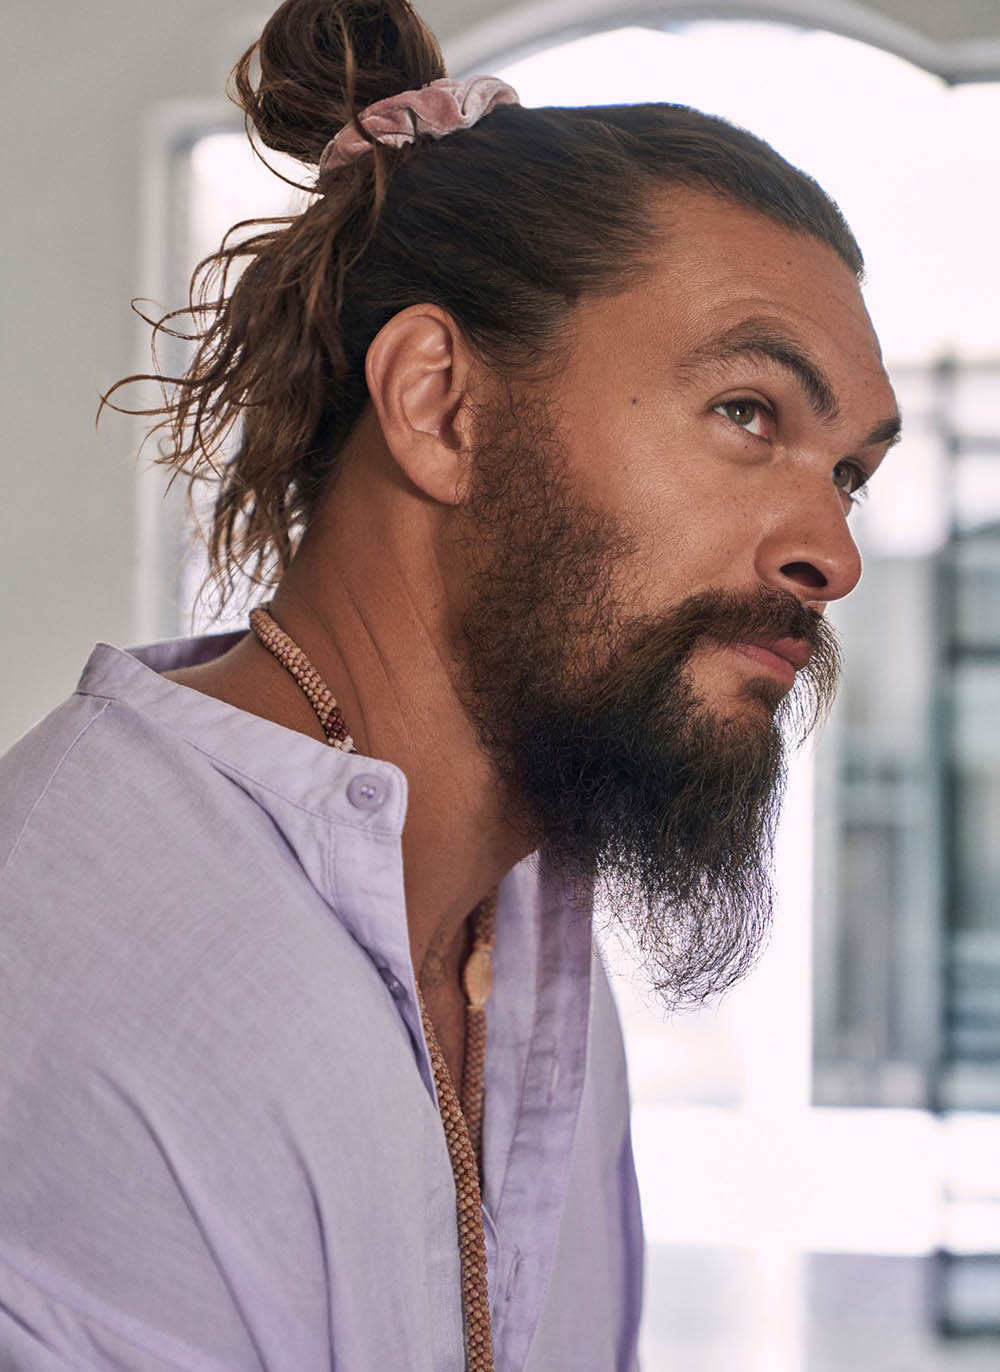 Jason Momoa by Carter Smith for InStyle US December 2020 fashionotography